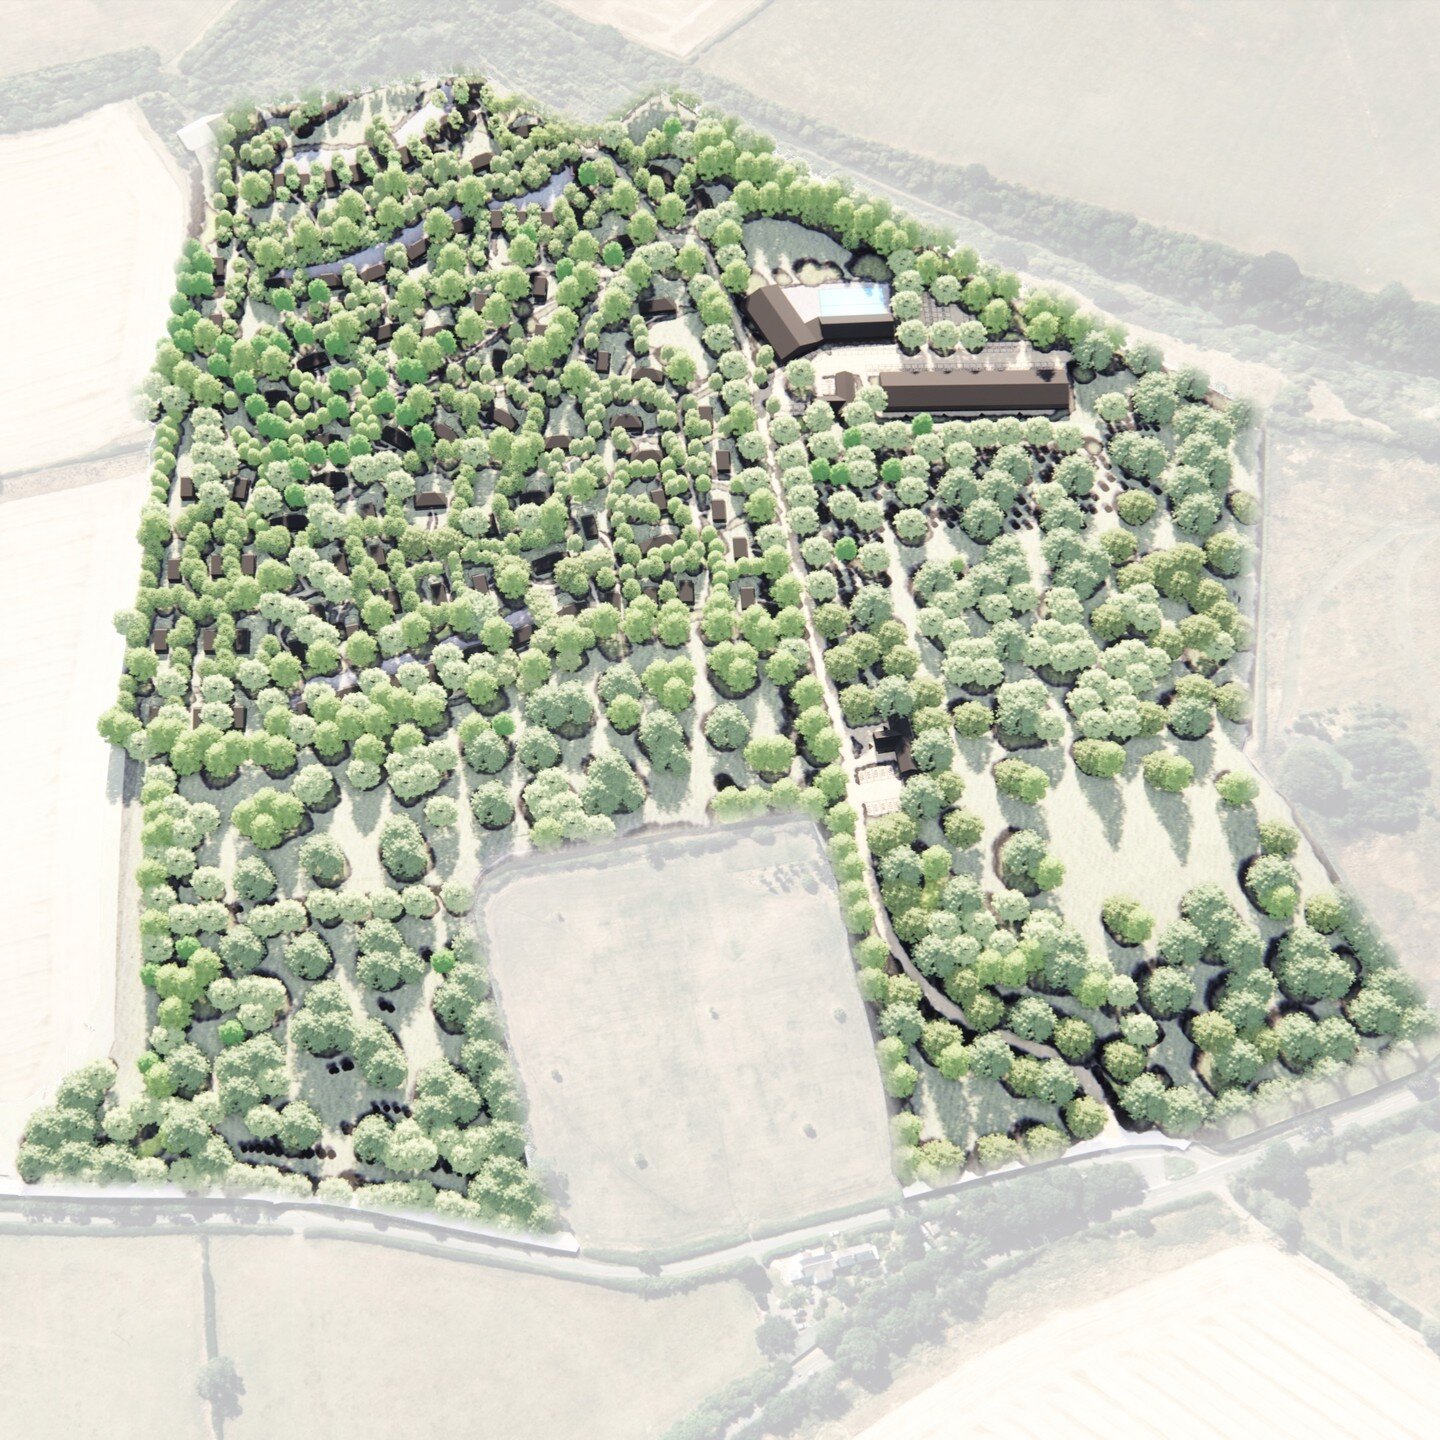 Outline application for the development of 90 Tourist Lodges with associated ancillary entertainment and retail uses.

#Stanifortharchitects #LeicestershireArchitecture #MidlandsArchitecture #Countryliving #Lodges @leestani4